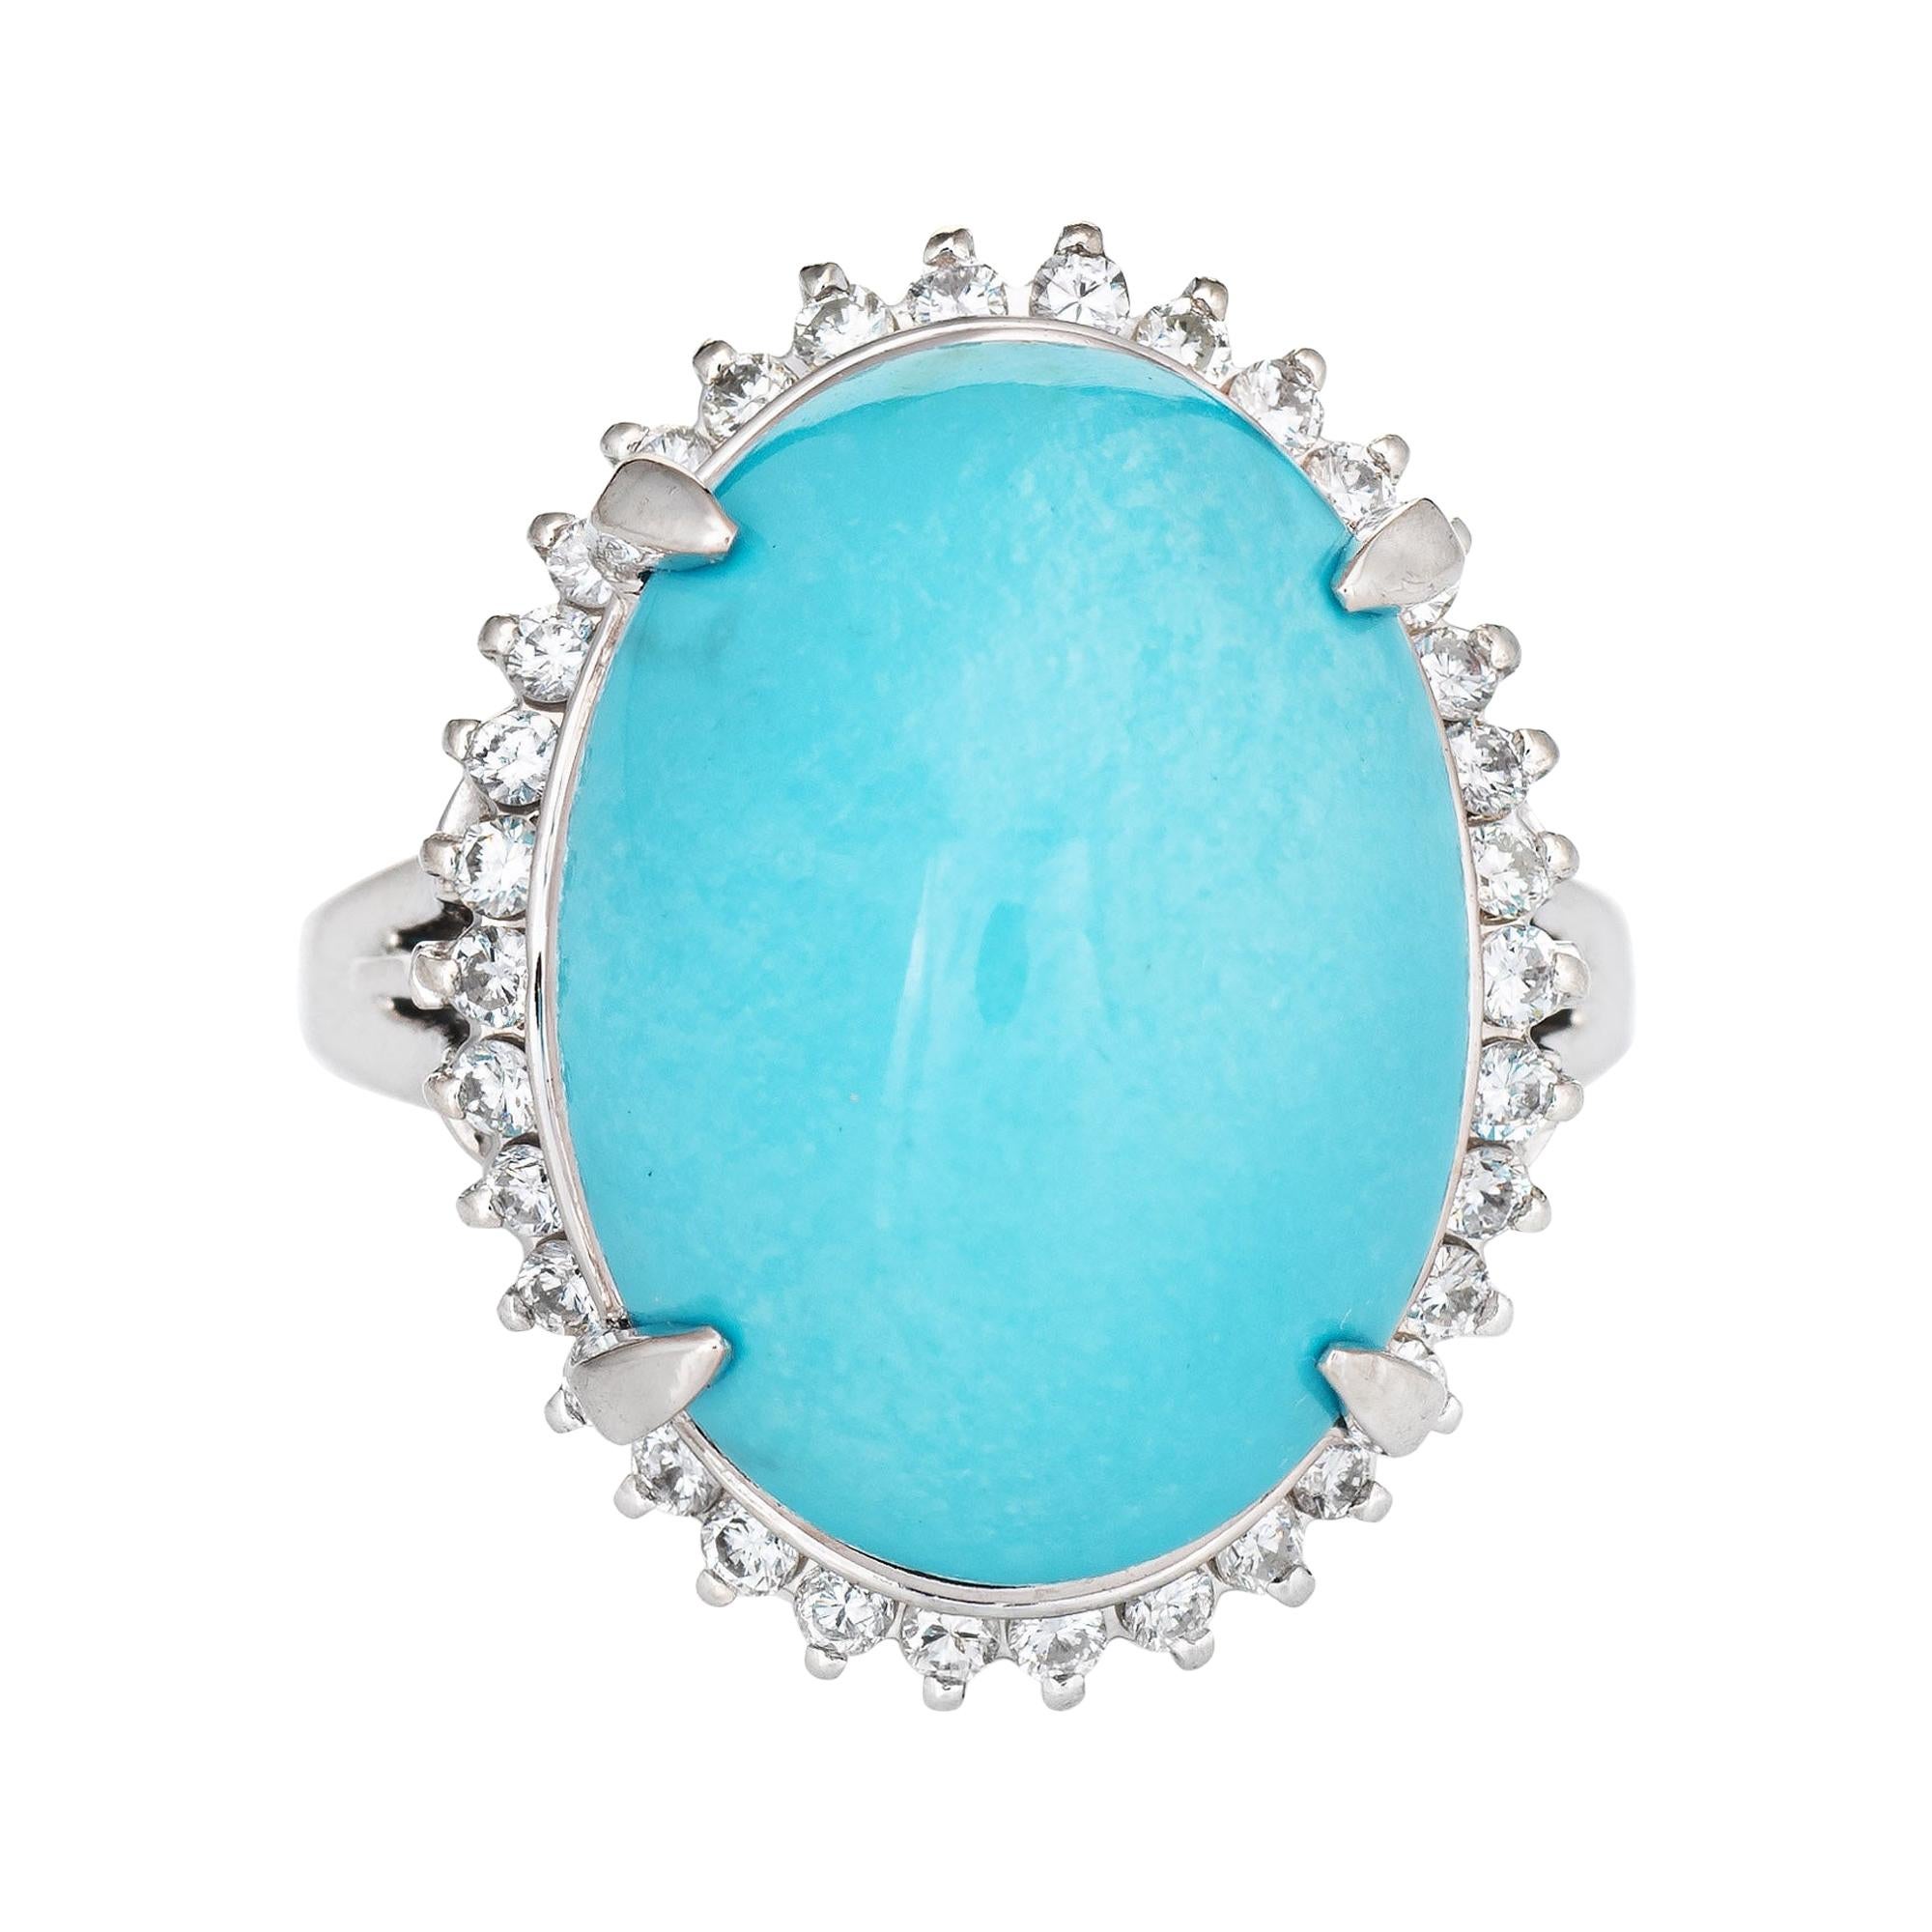 Egg Shell Blue Turquoise Diamond Ring Platinum Estate Large Cocktail Jewelry For Sale